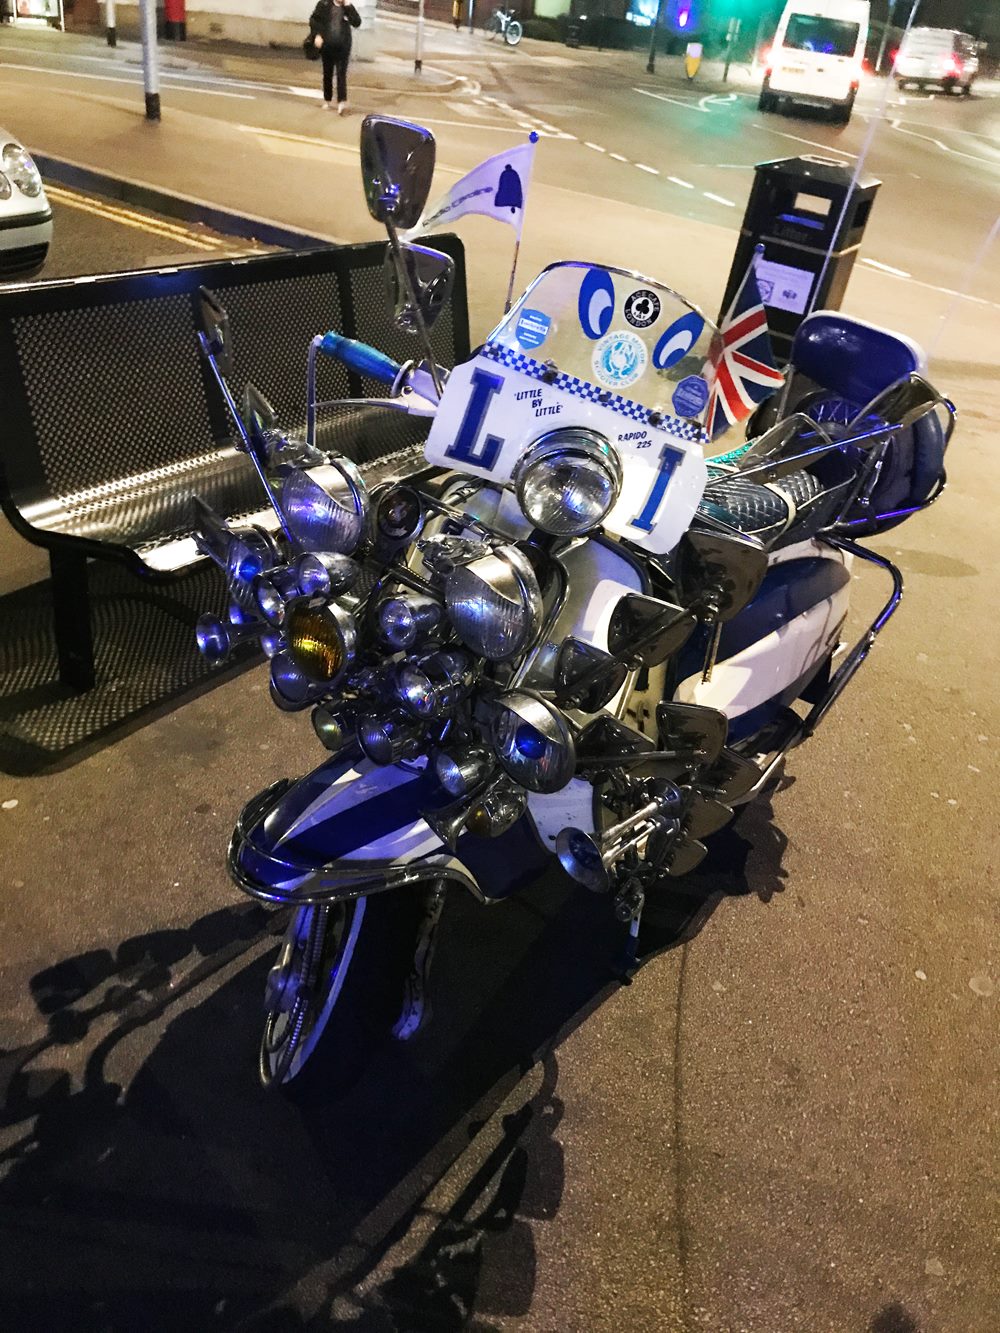 Scooter rally. — at The King Billy Rock bar